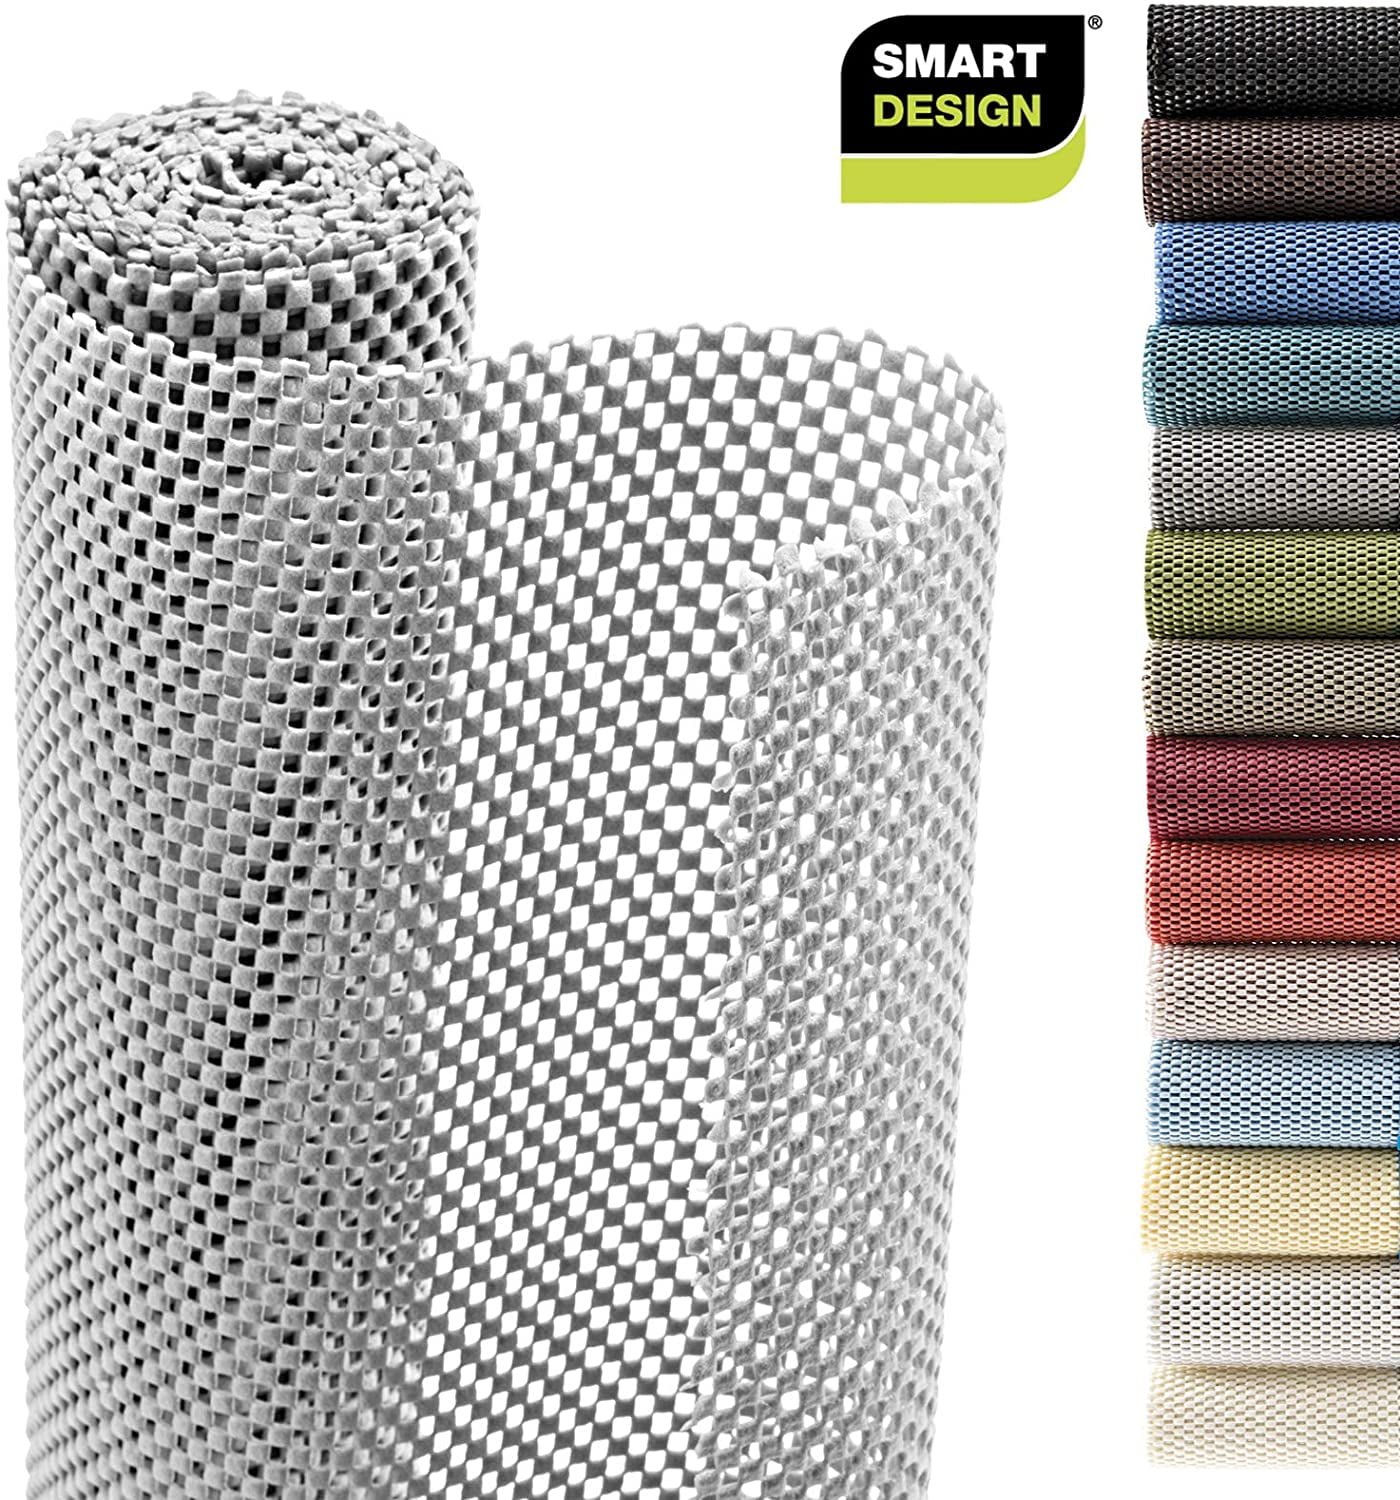 Smart Design Bonded Grip Shelf Liner – 18in x 5ft – Non-Adhesive Drawer  Liner with Strong Grip Helps Protect and Personalize Your Home Organization